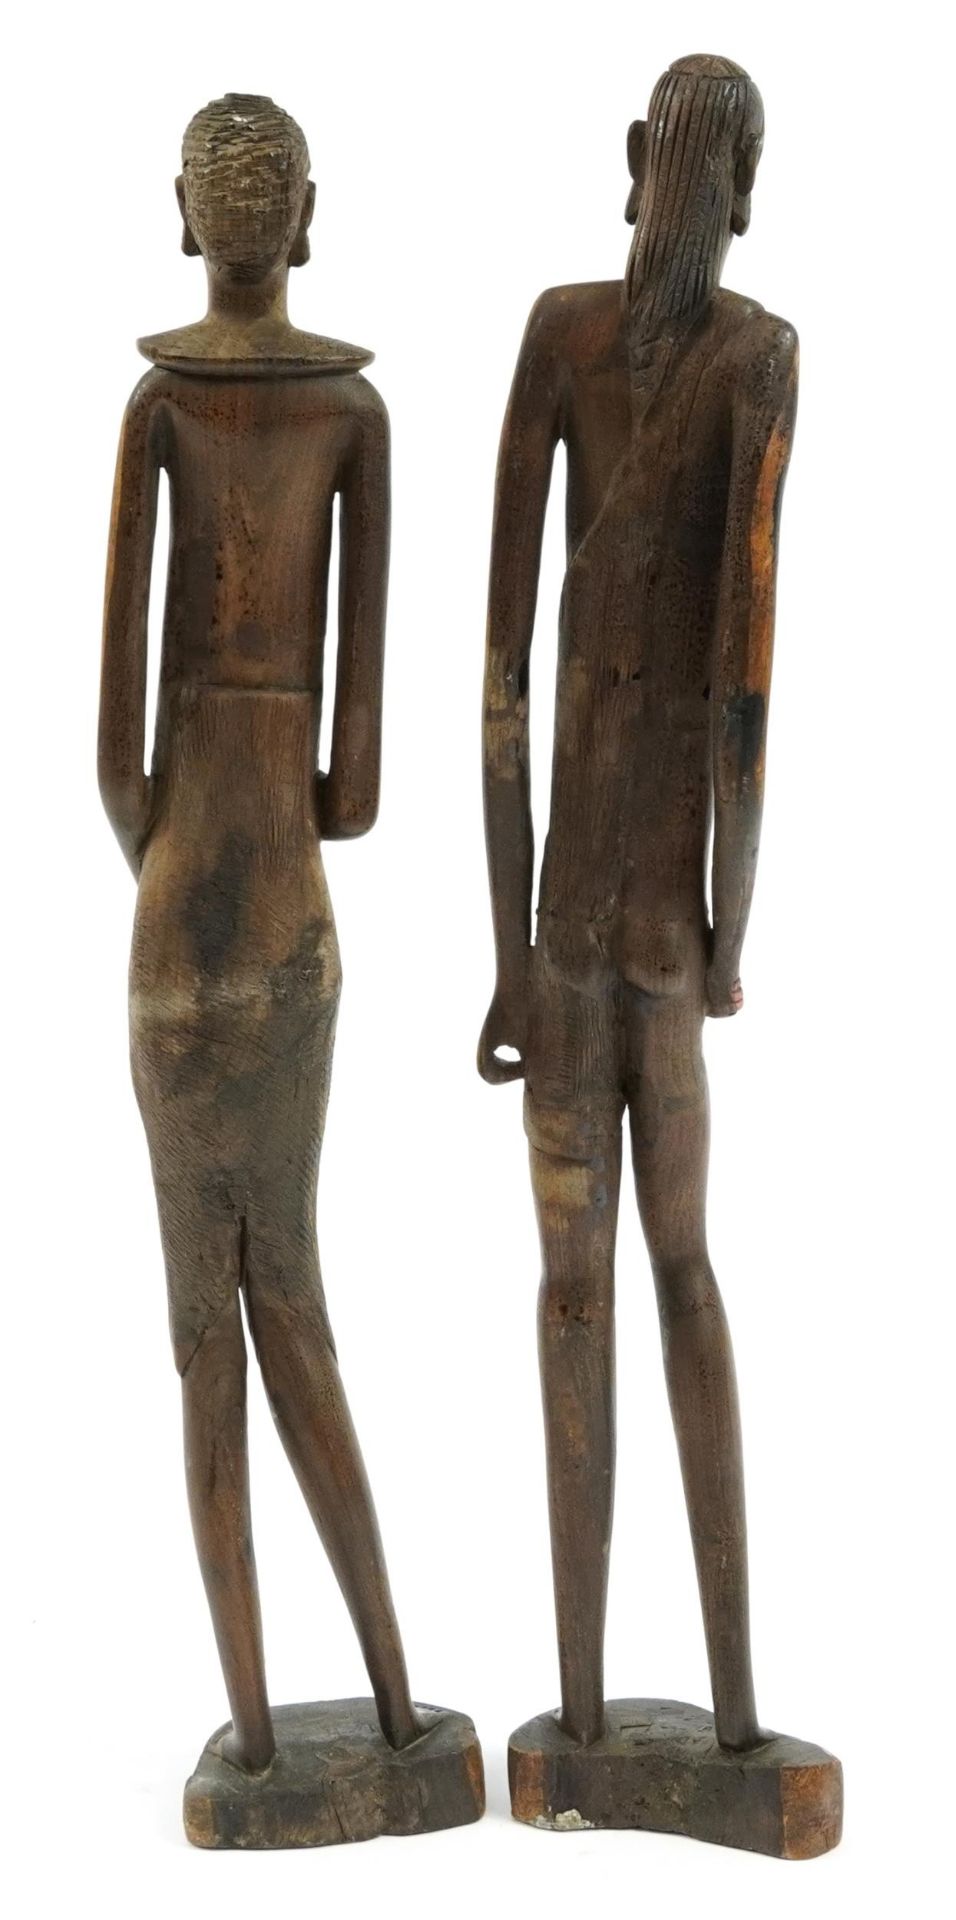 Pair of West African carved wood figures of a male and female, each 59cm high - Image 2 of 3